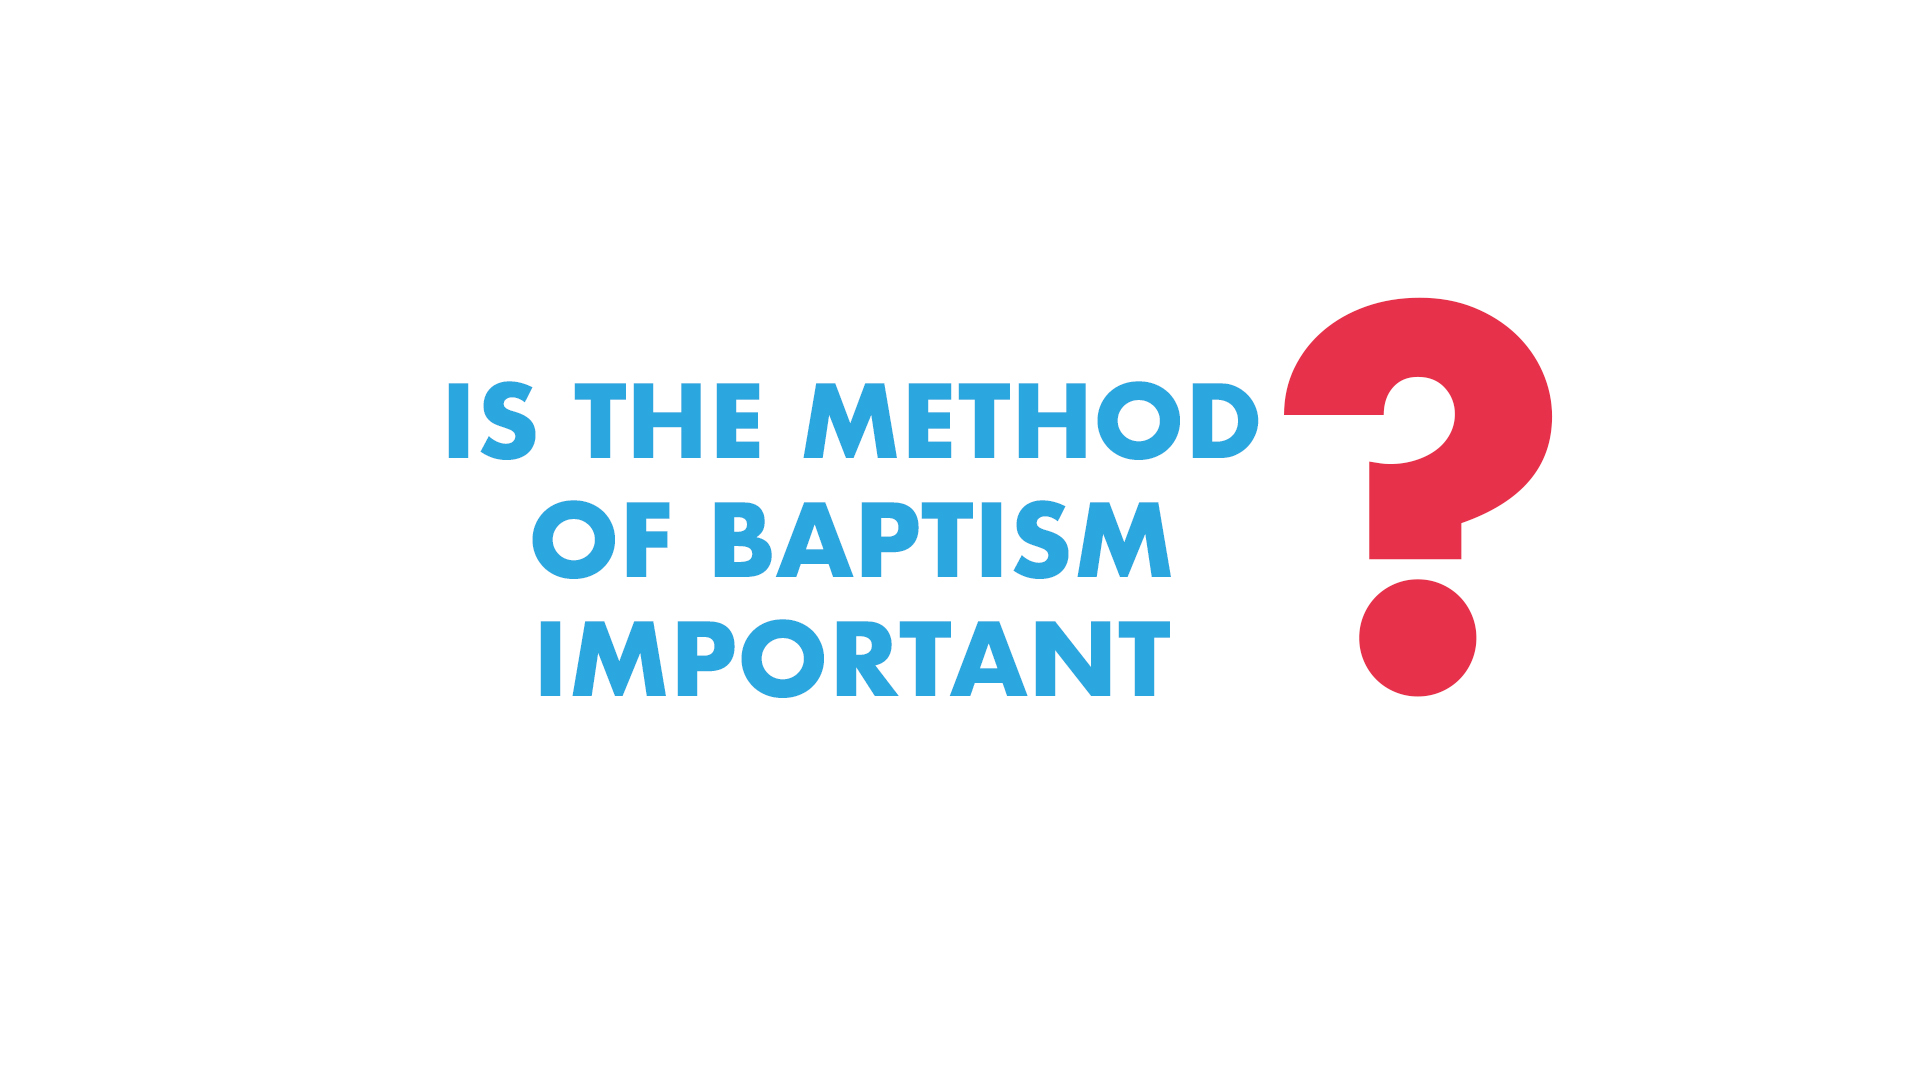 Is the Method of Baptism Important?